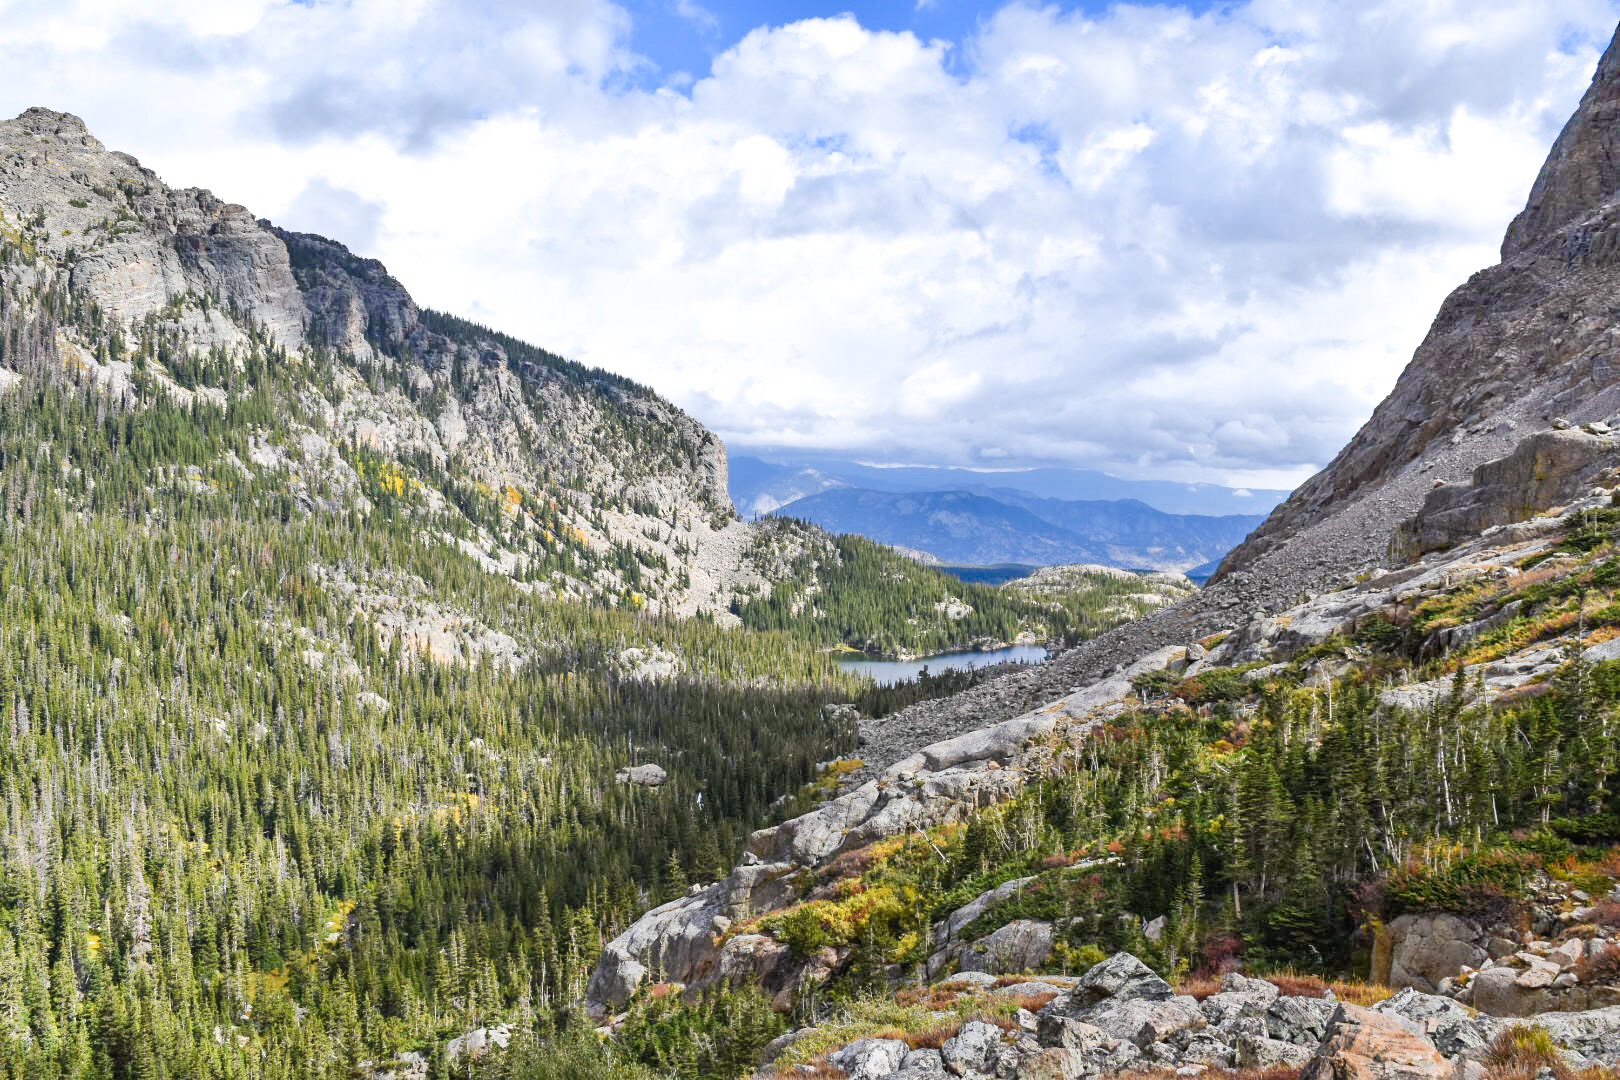 Hiking to Sky Pond in Rocky Mountain National Park